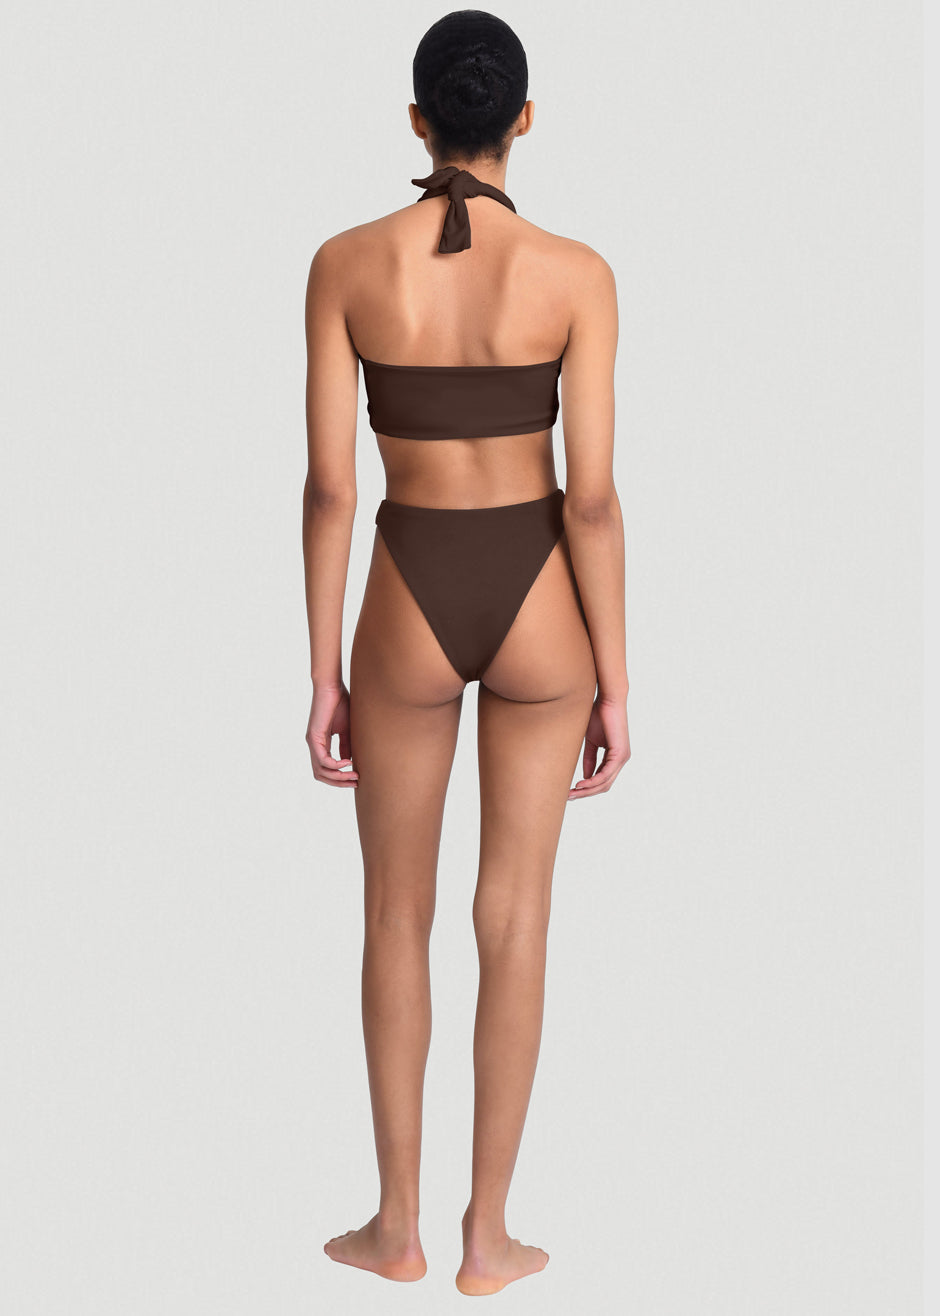 Aexae Triangle High Cut Swimsuit Bottoms - Brown - 3